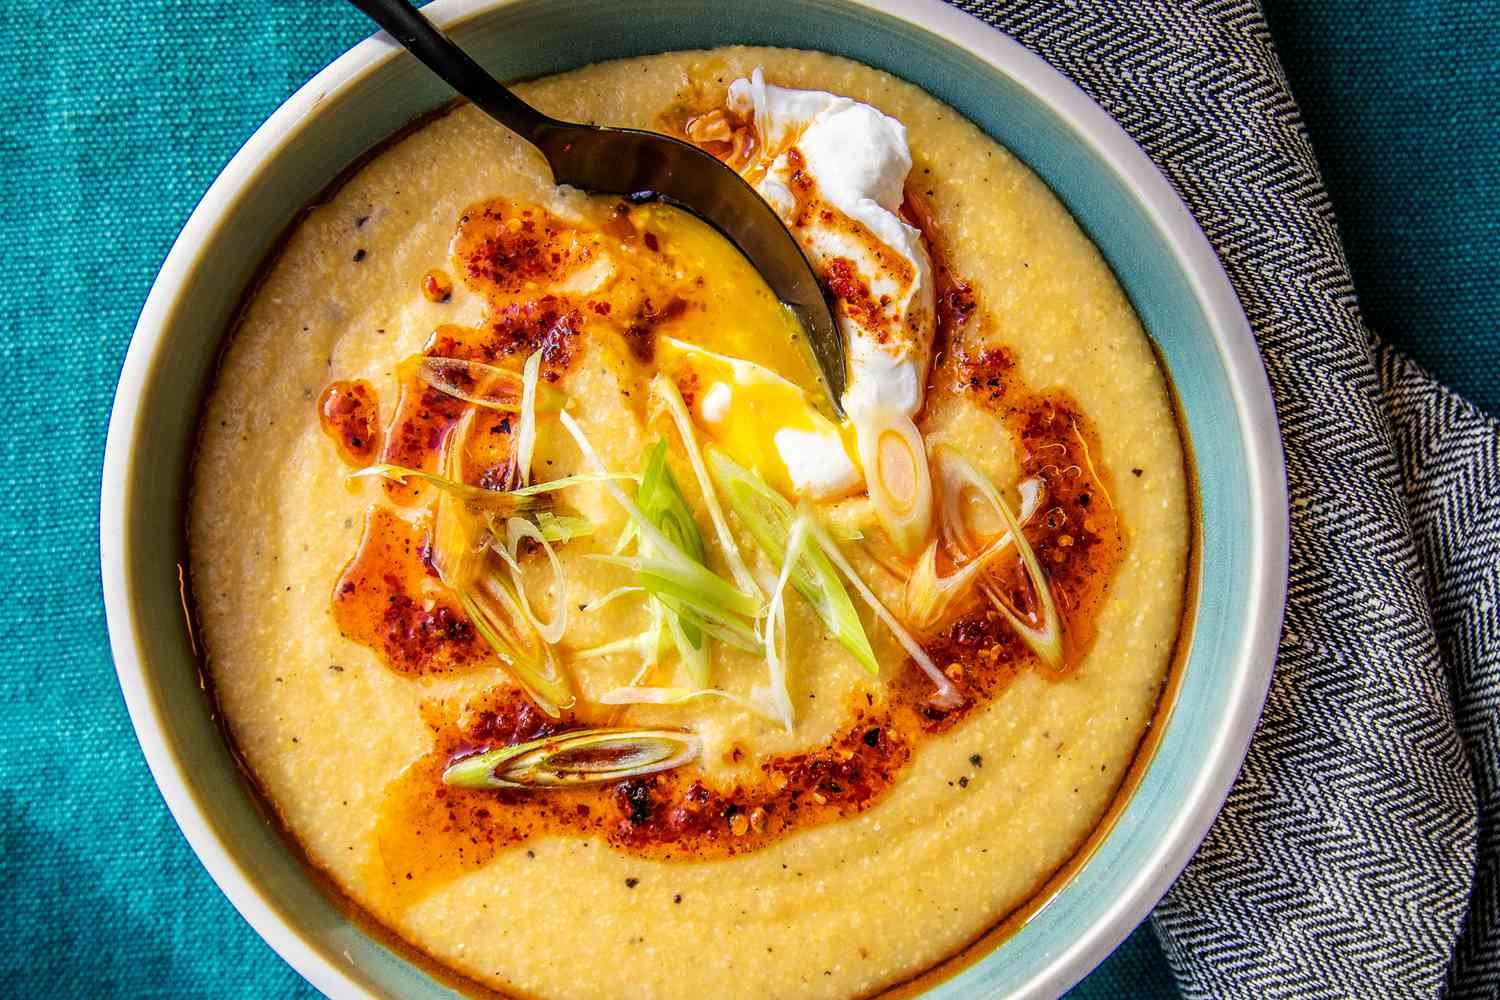 To Make the Creamiest Polenta, Don't Turn on the Stove